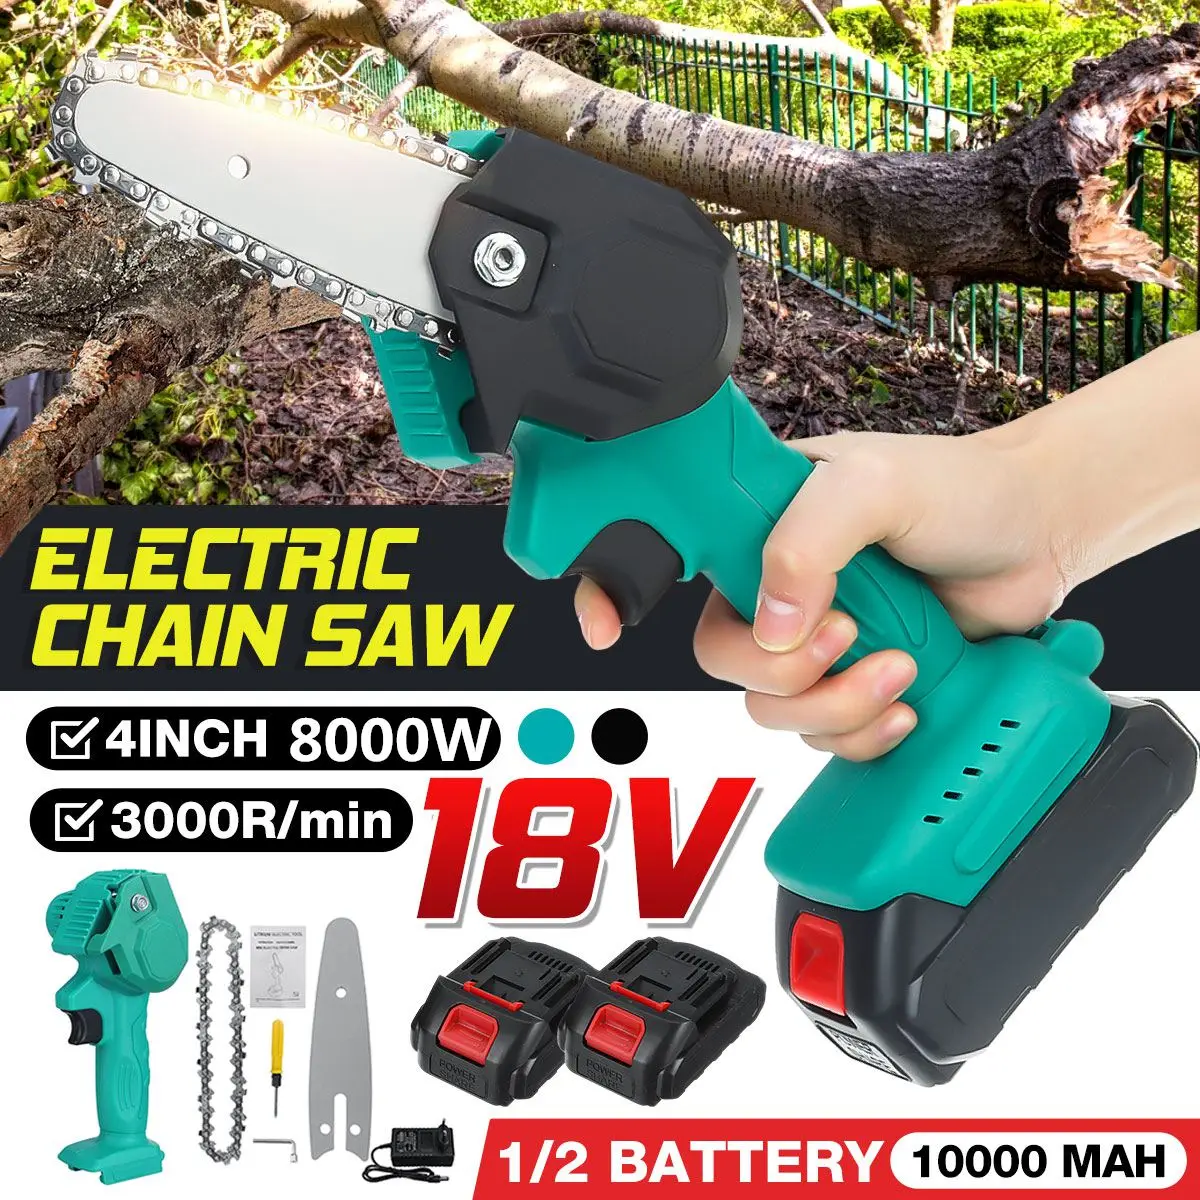 Фото - 2400W 4 inch Electric Chain Saws Wood Cutting Pruning ChainSaw Cordless Garden Tree Logging Trimming Saw for Makita Battery 16 8v 2700rpm mini electric chainsaw pruning saw 4 inch garden tree logging saw woodworking tools wood cutters for 18v battery